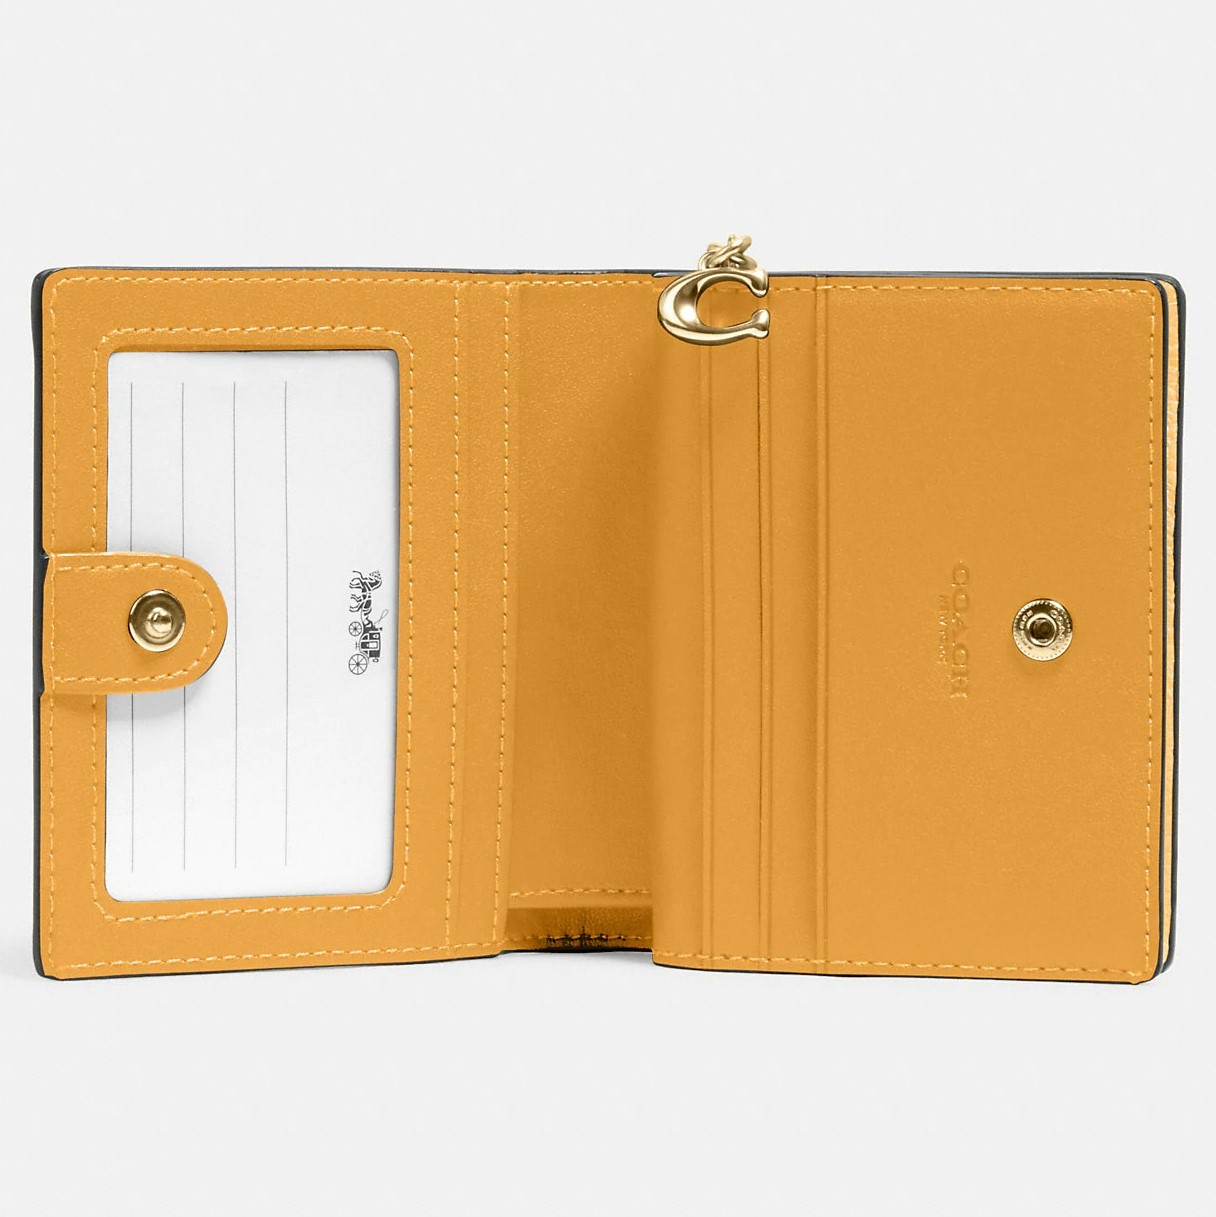 VÍ NGẮN COACH SMALL WALLET PEBBLE LEATHER SNAP WALLET 35